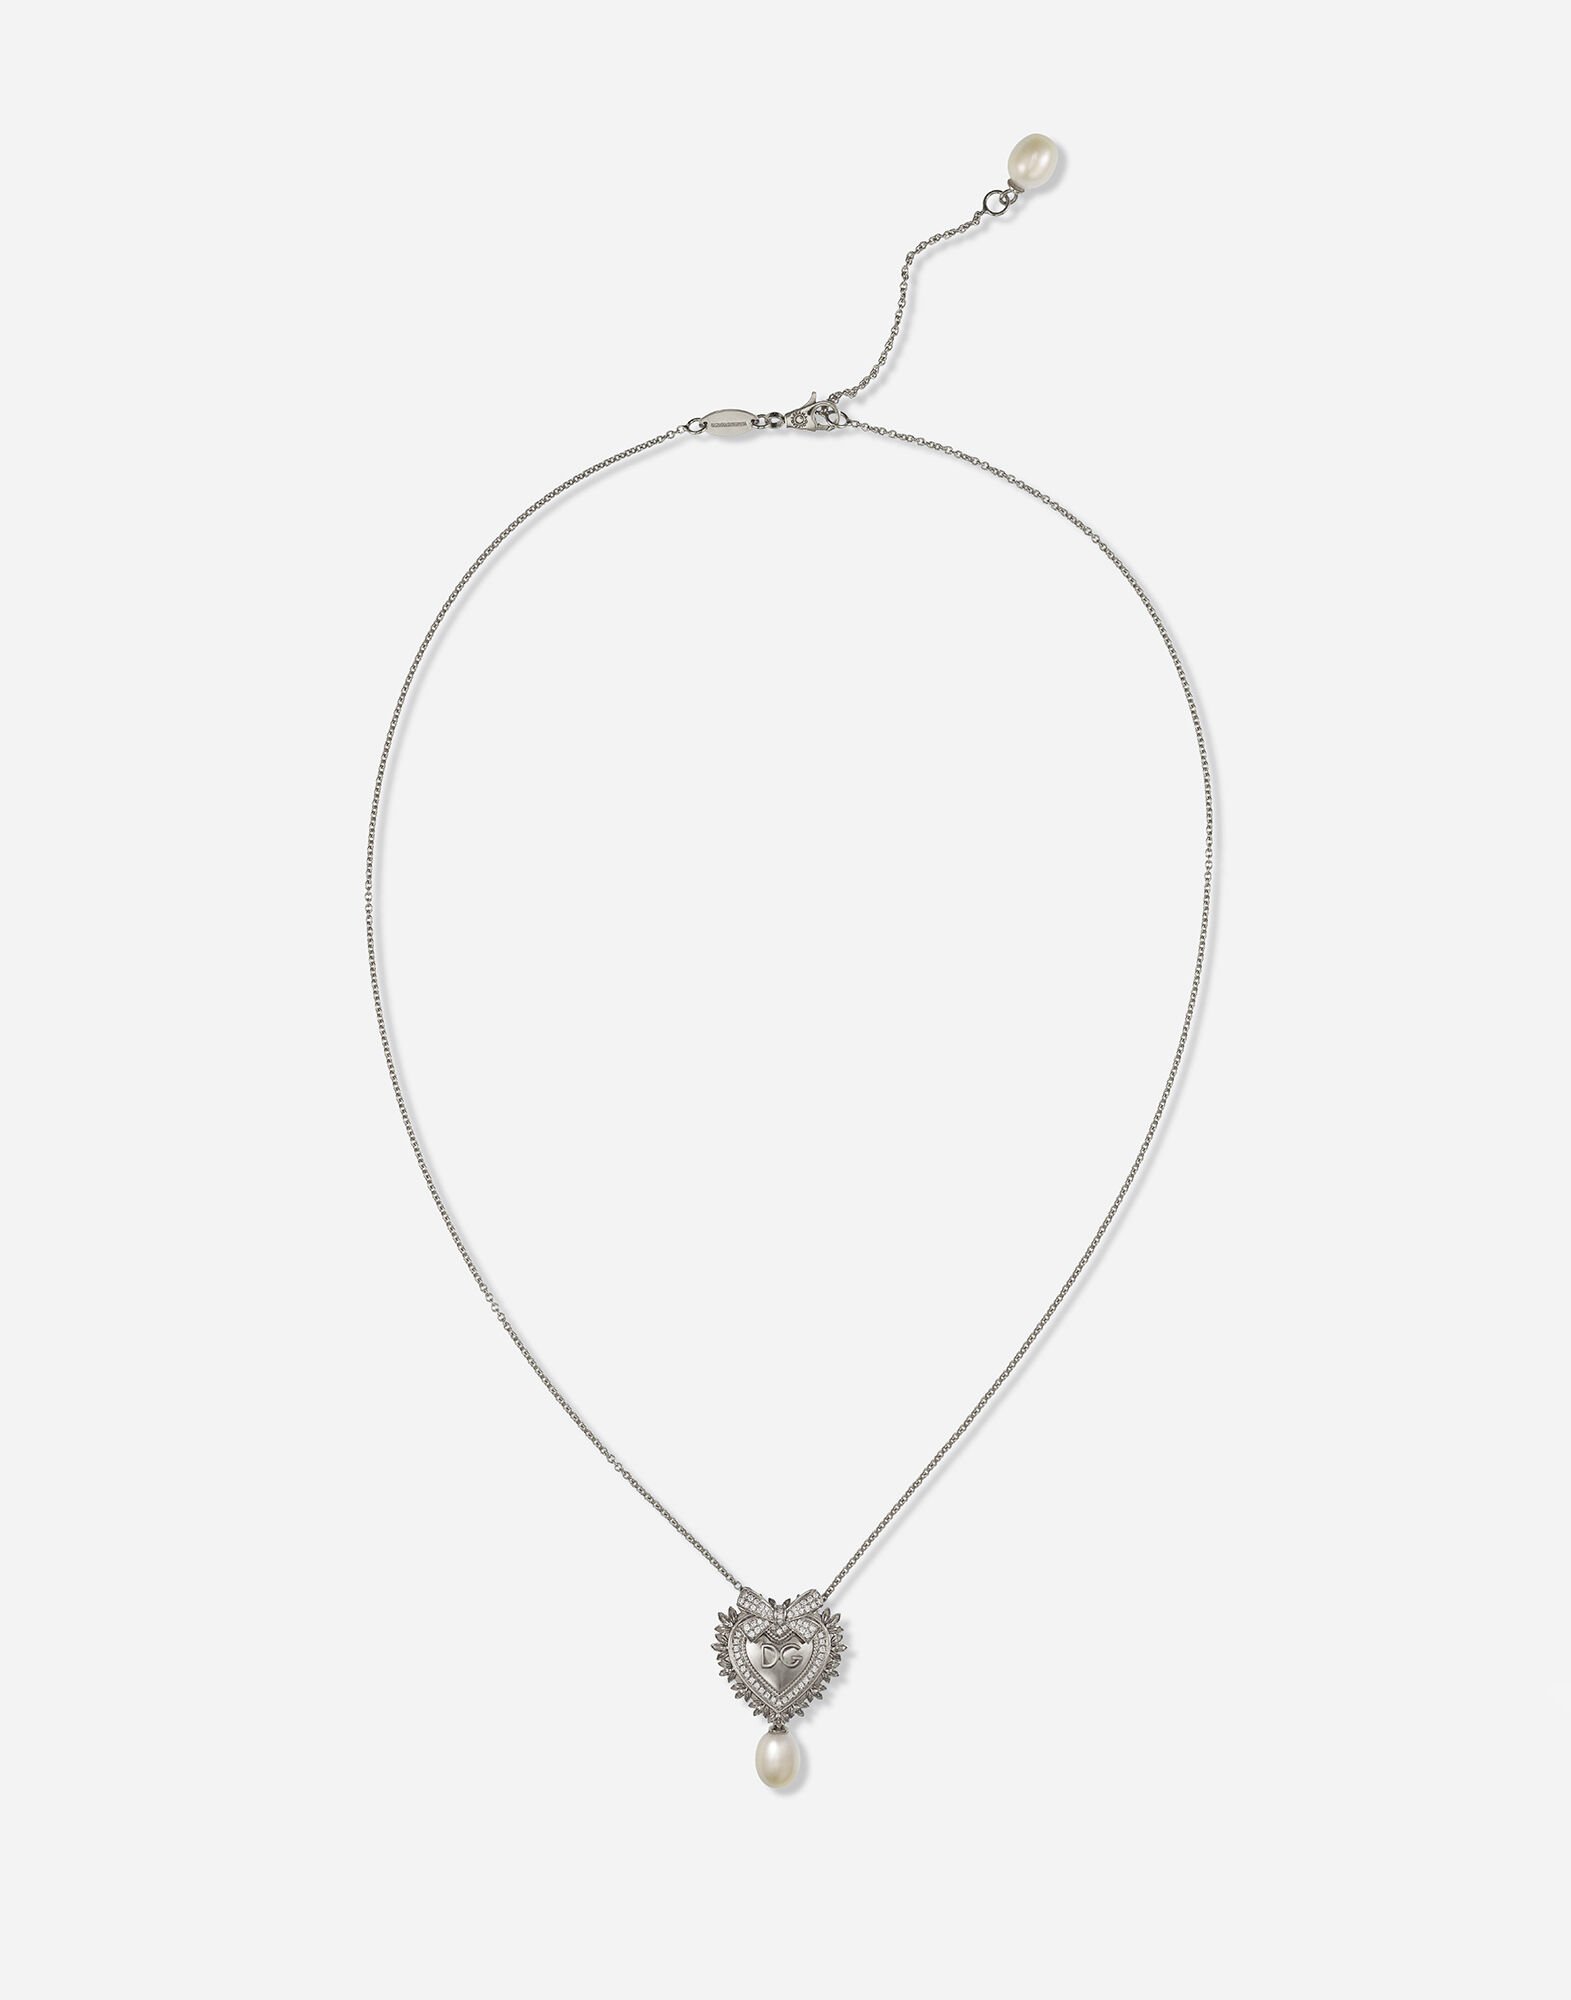 Dolce & Gabbana Devotion necklace in white gold with diamonds and pearls Yellow Gold WALD1GWDPEY